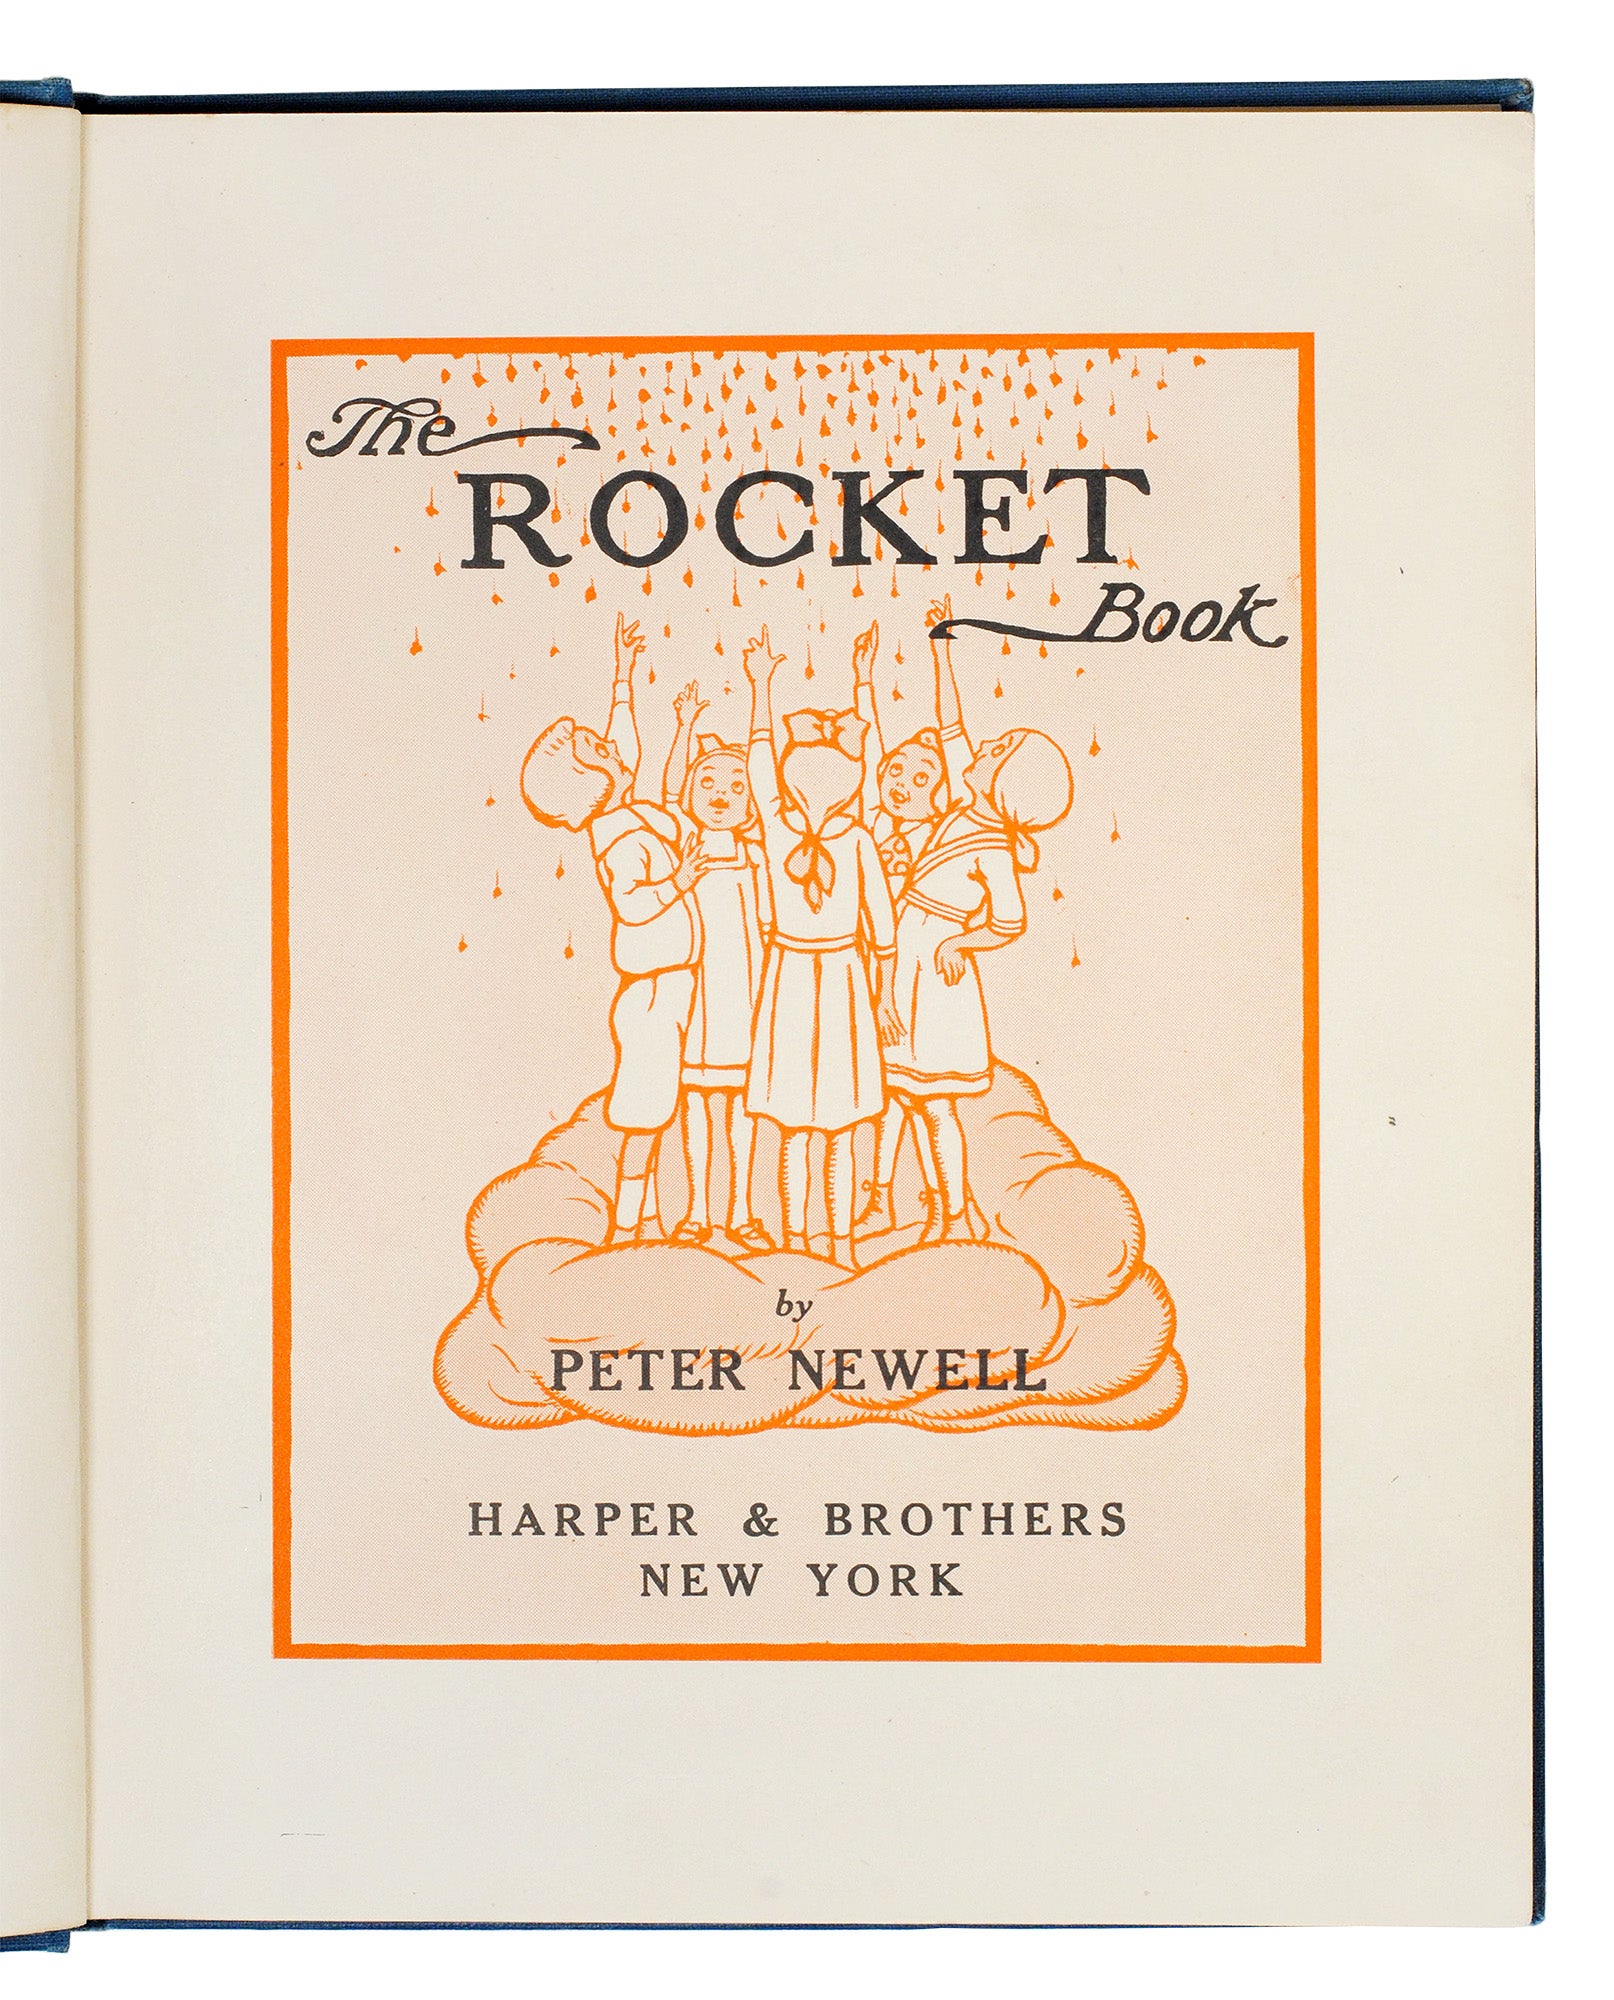 The Rocket Book by Peter Newell on John Windle Antiquarian Bookseller